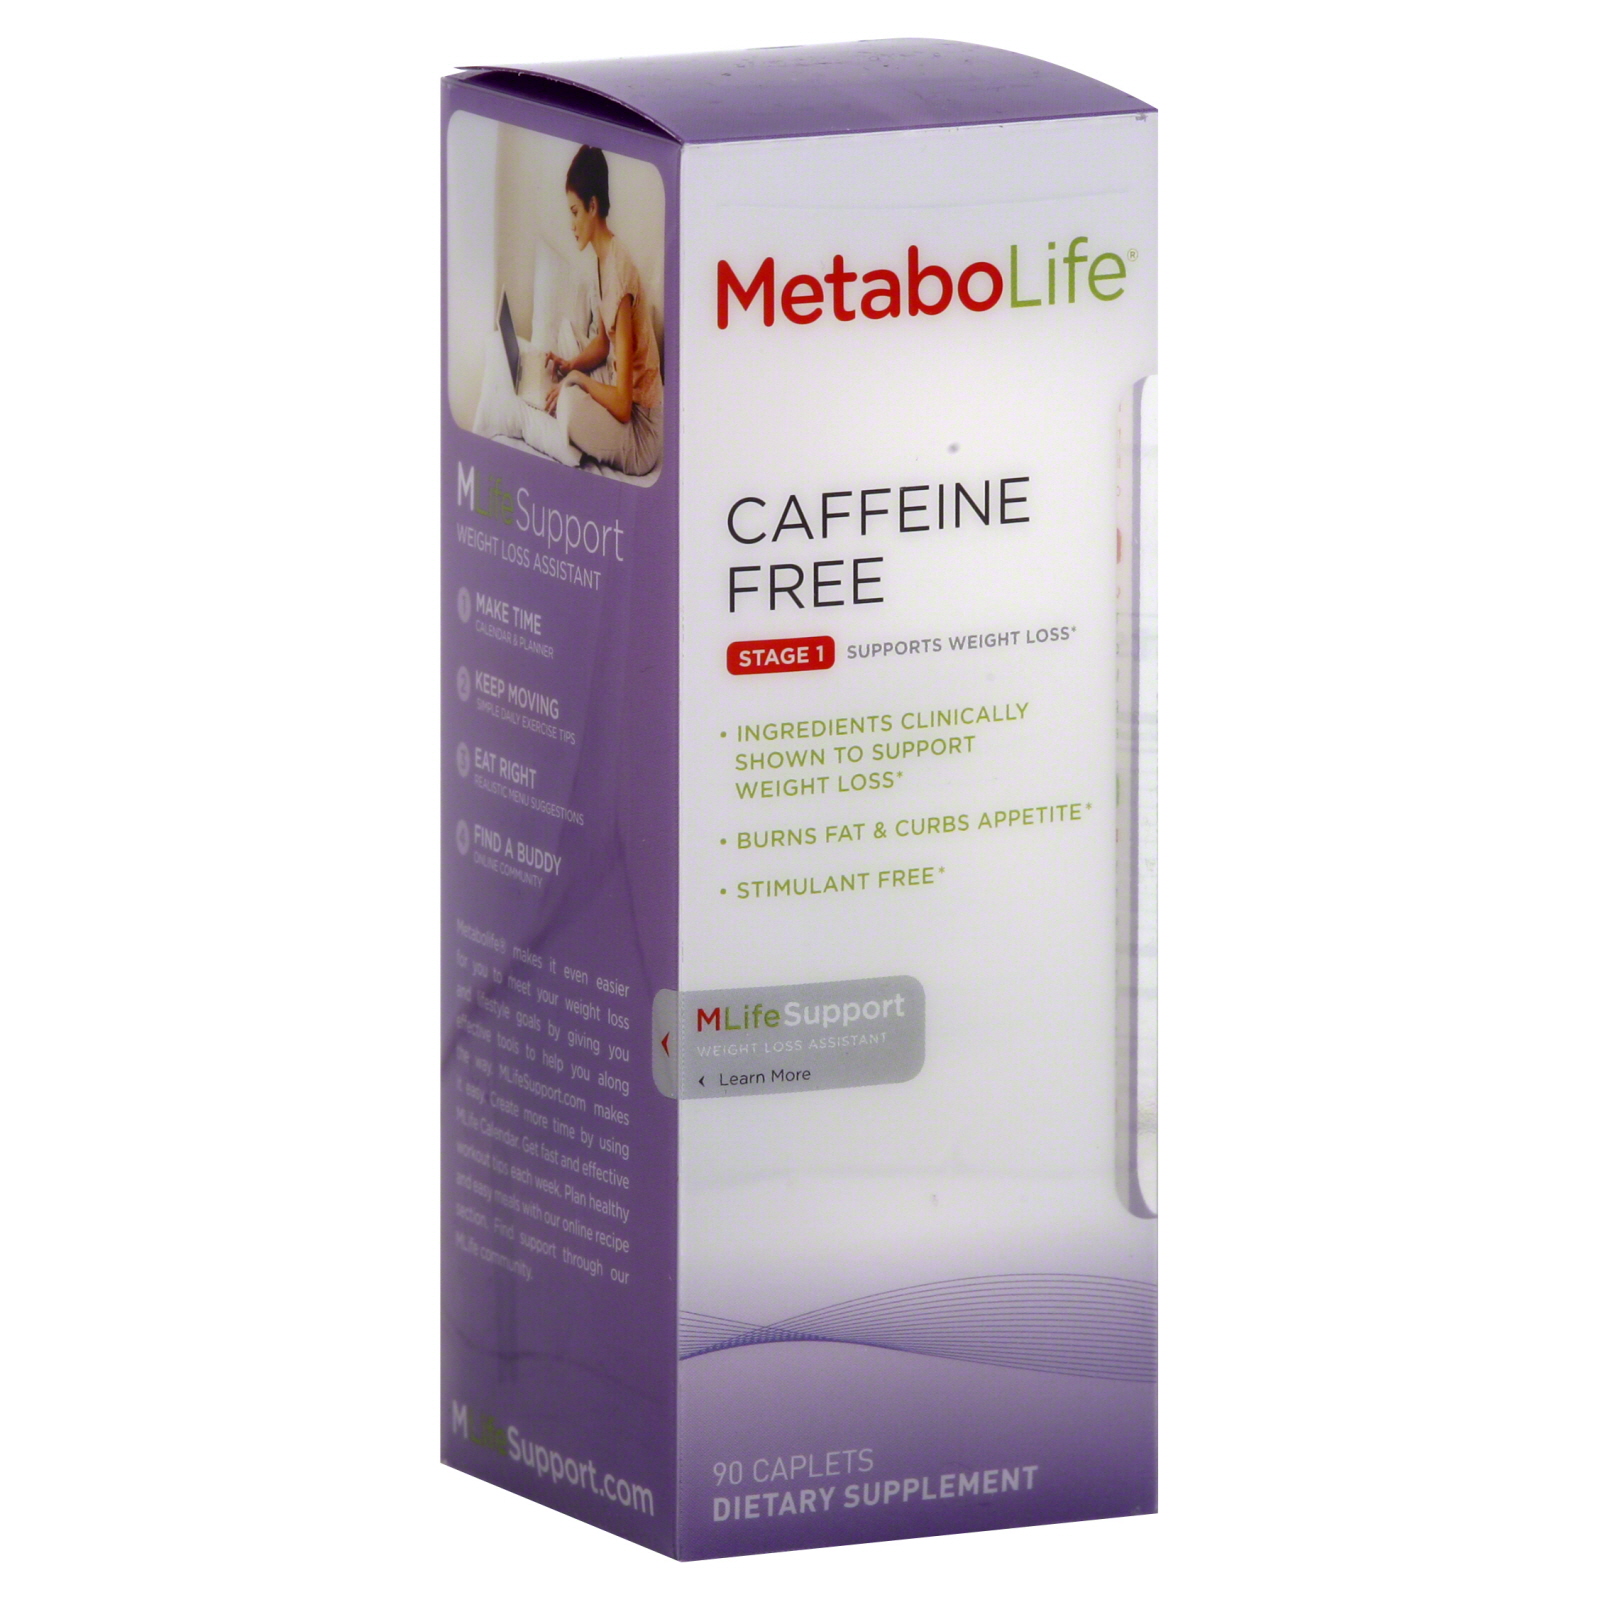 Caffeine Free, Stage 1, Supports Weight Loss, Caplets, 90 caplets